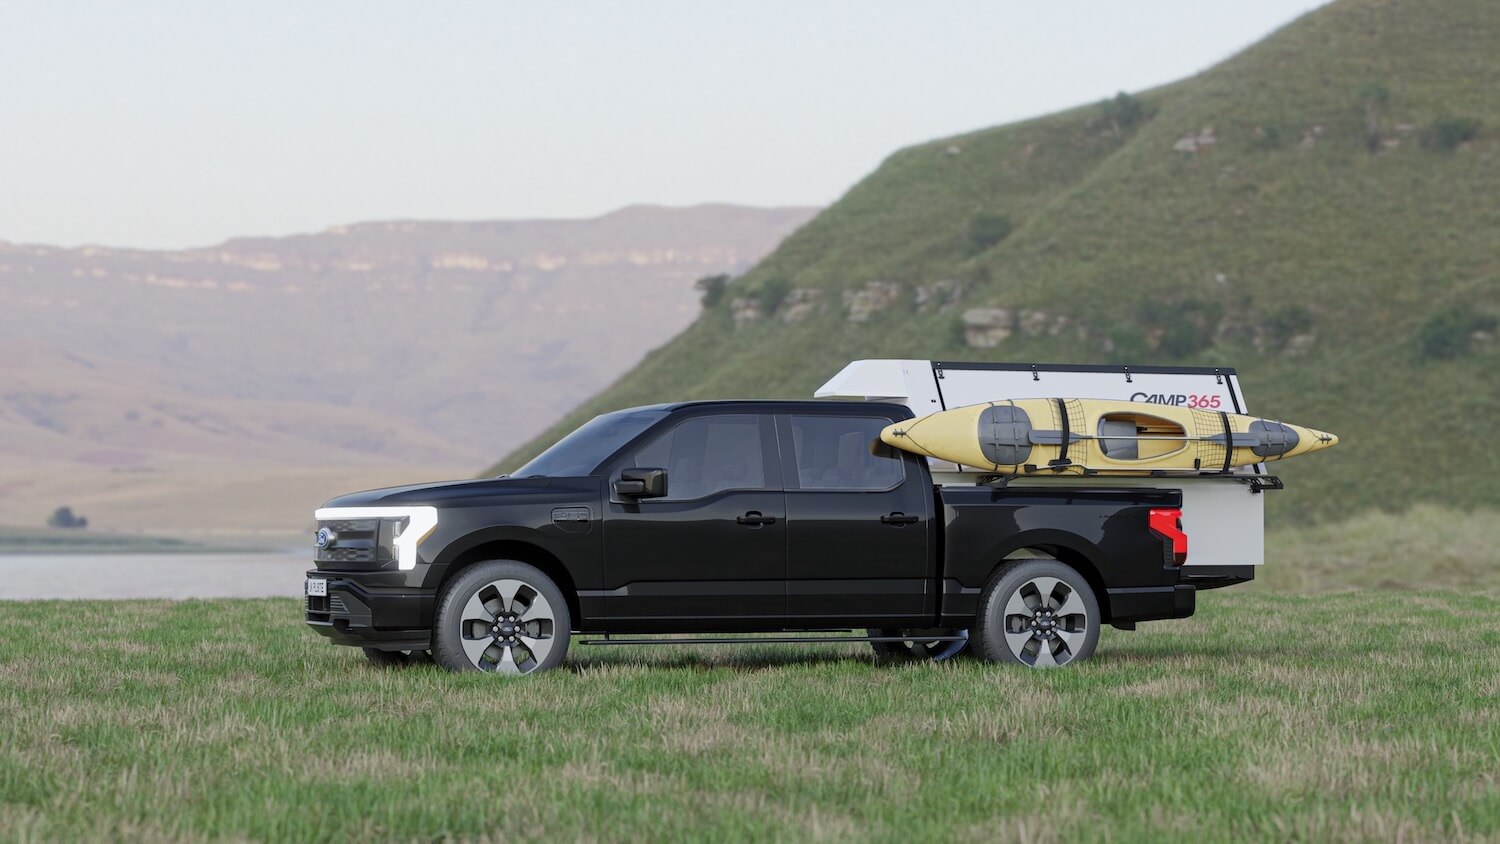 camp365 t model is a modern truck bed camper specifically designed for electric pickups 5